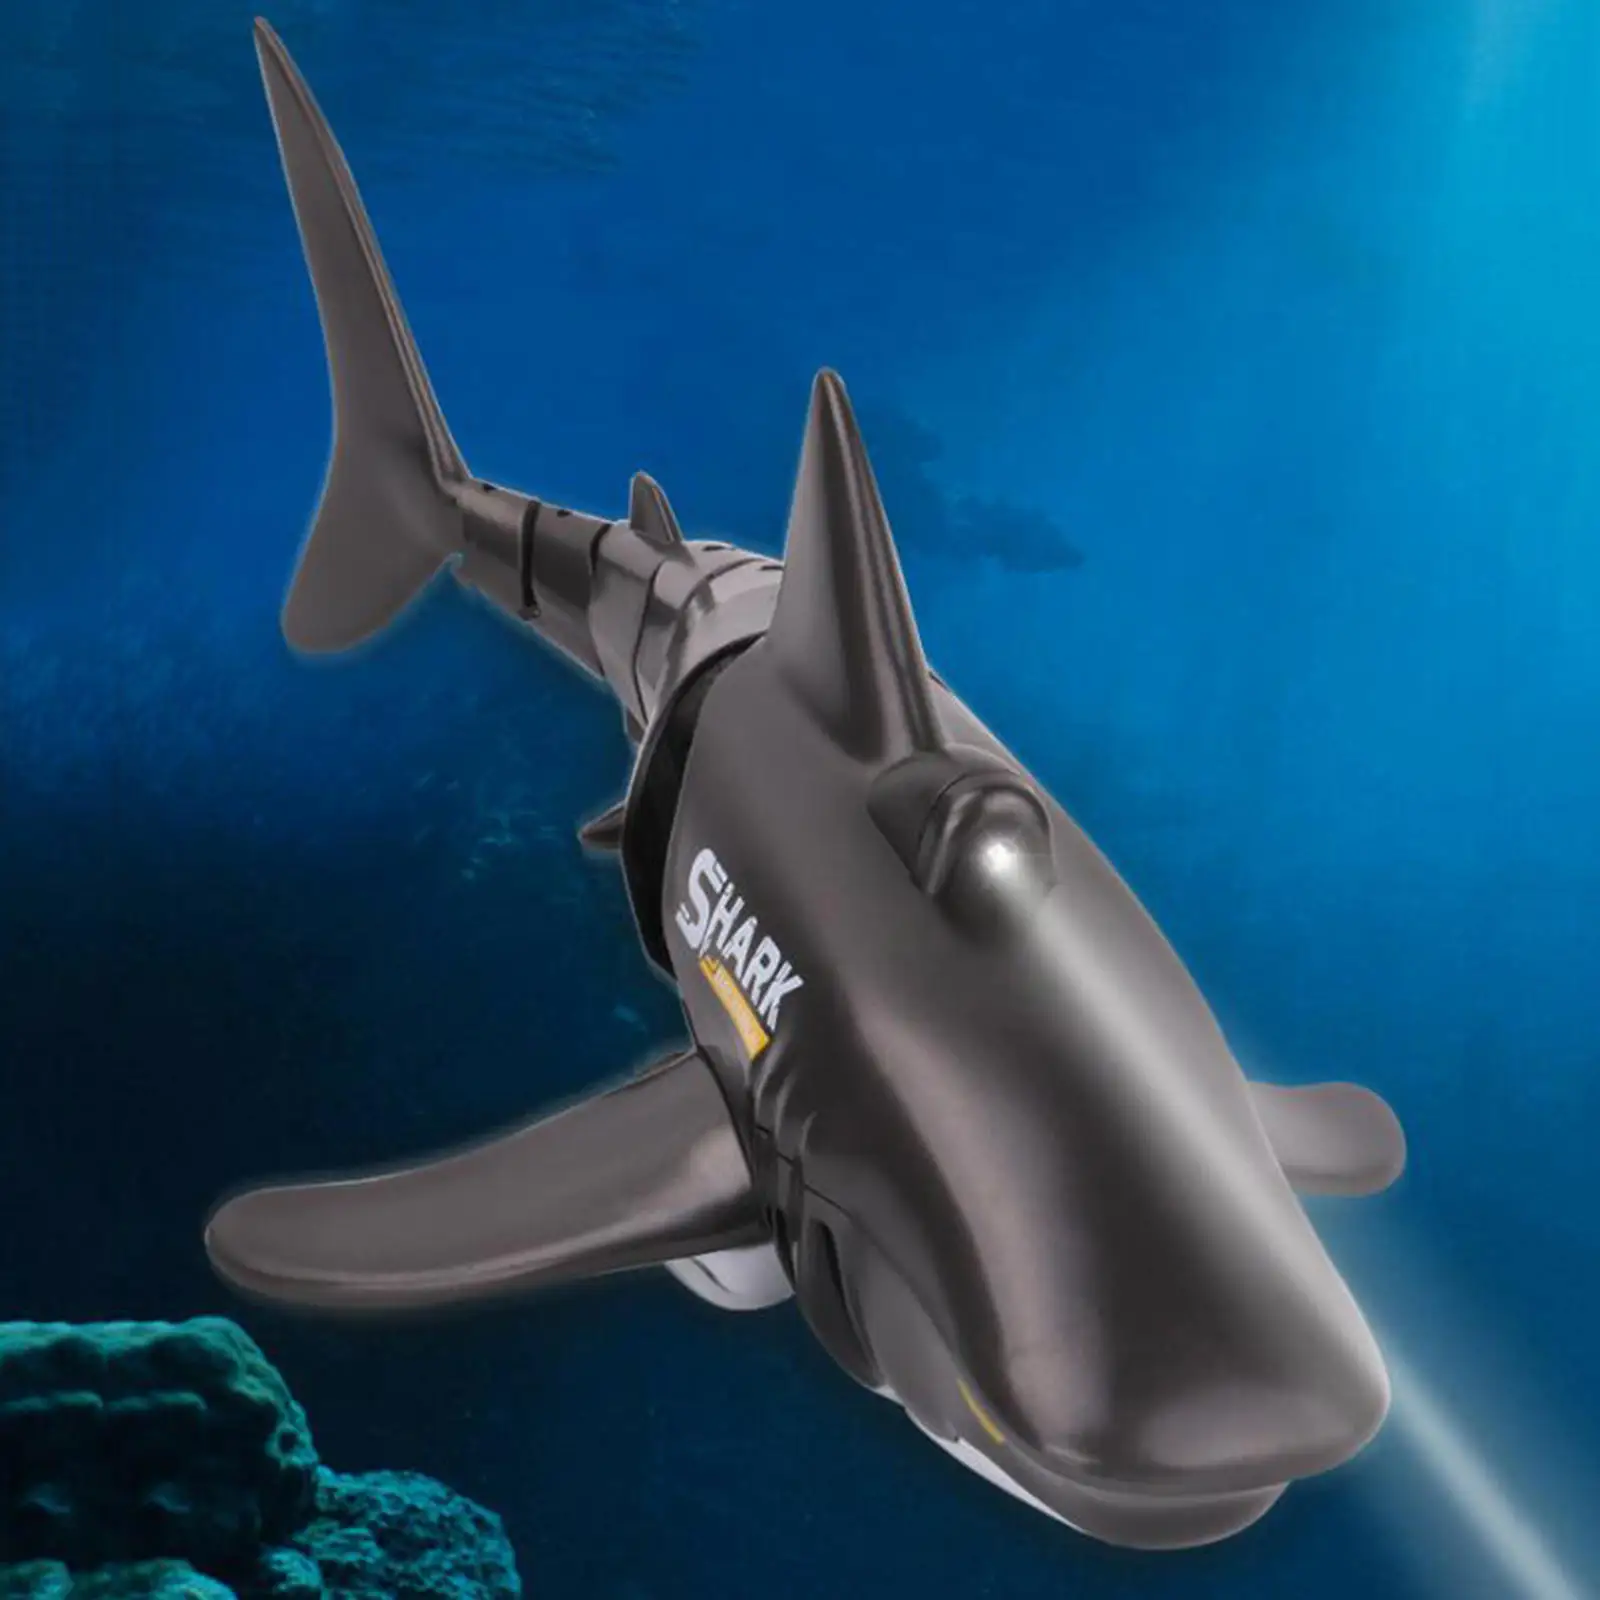 Remote Control Shark Toy 1:18 Scale with Battery Waterproof RC Boat Pool Bathroom Toy Gift Boys Girls